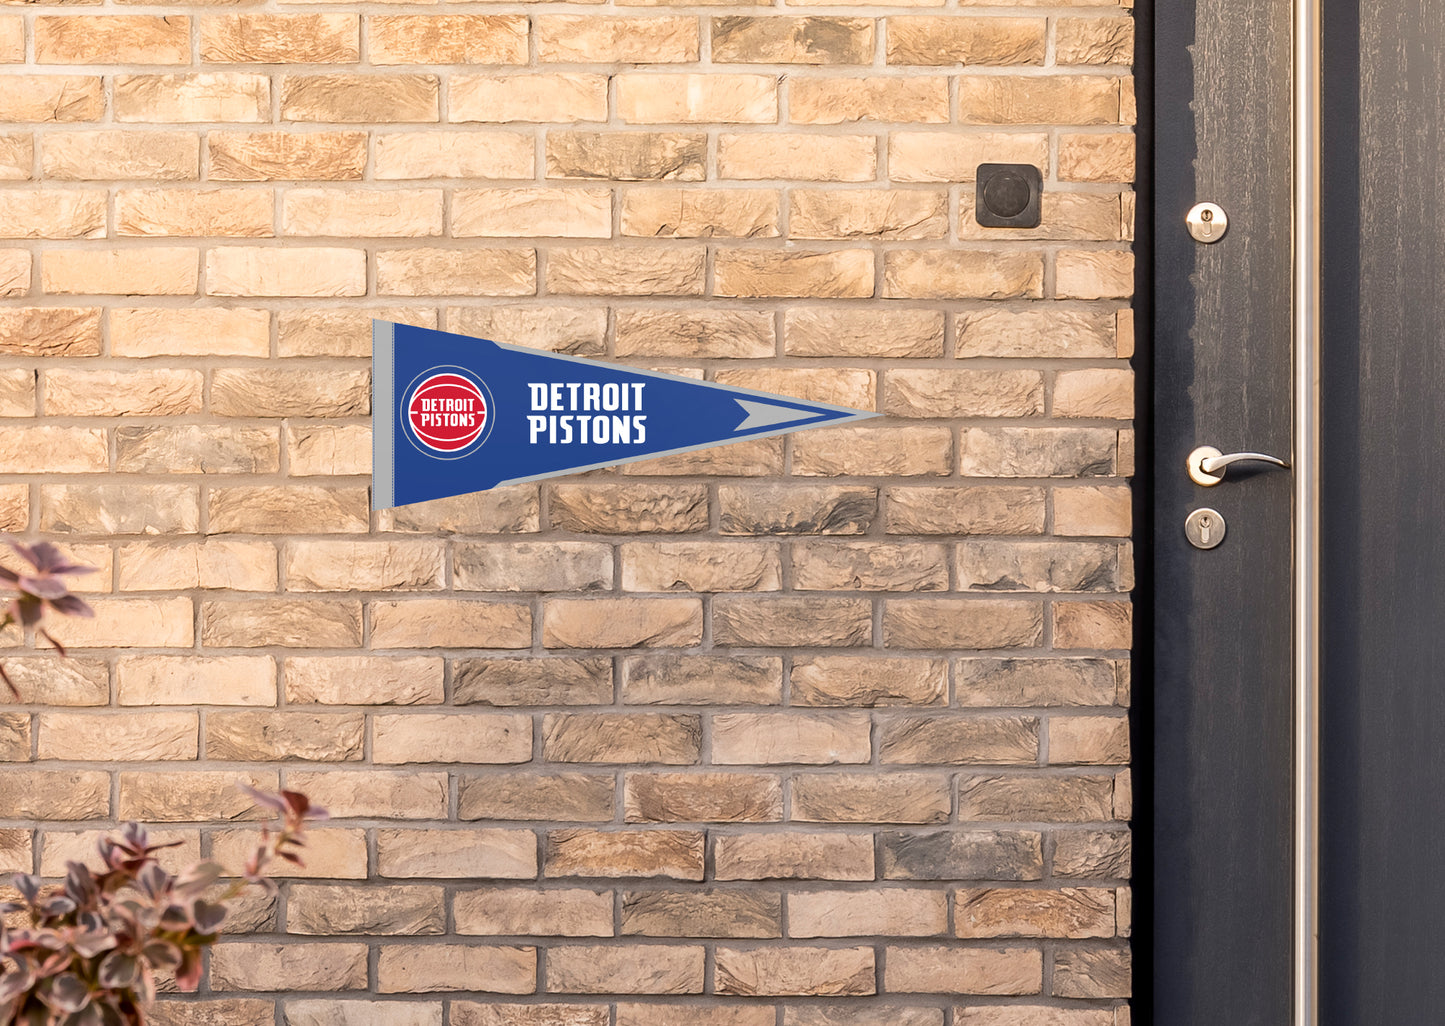 Detroit Pistons: Pennant - Officially Licensed NBA Outdoor Graphic